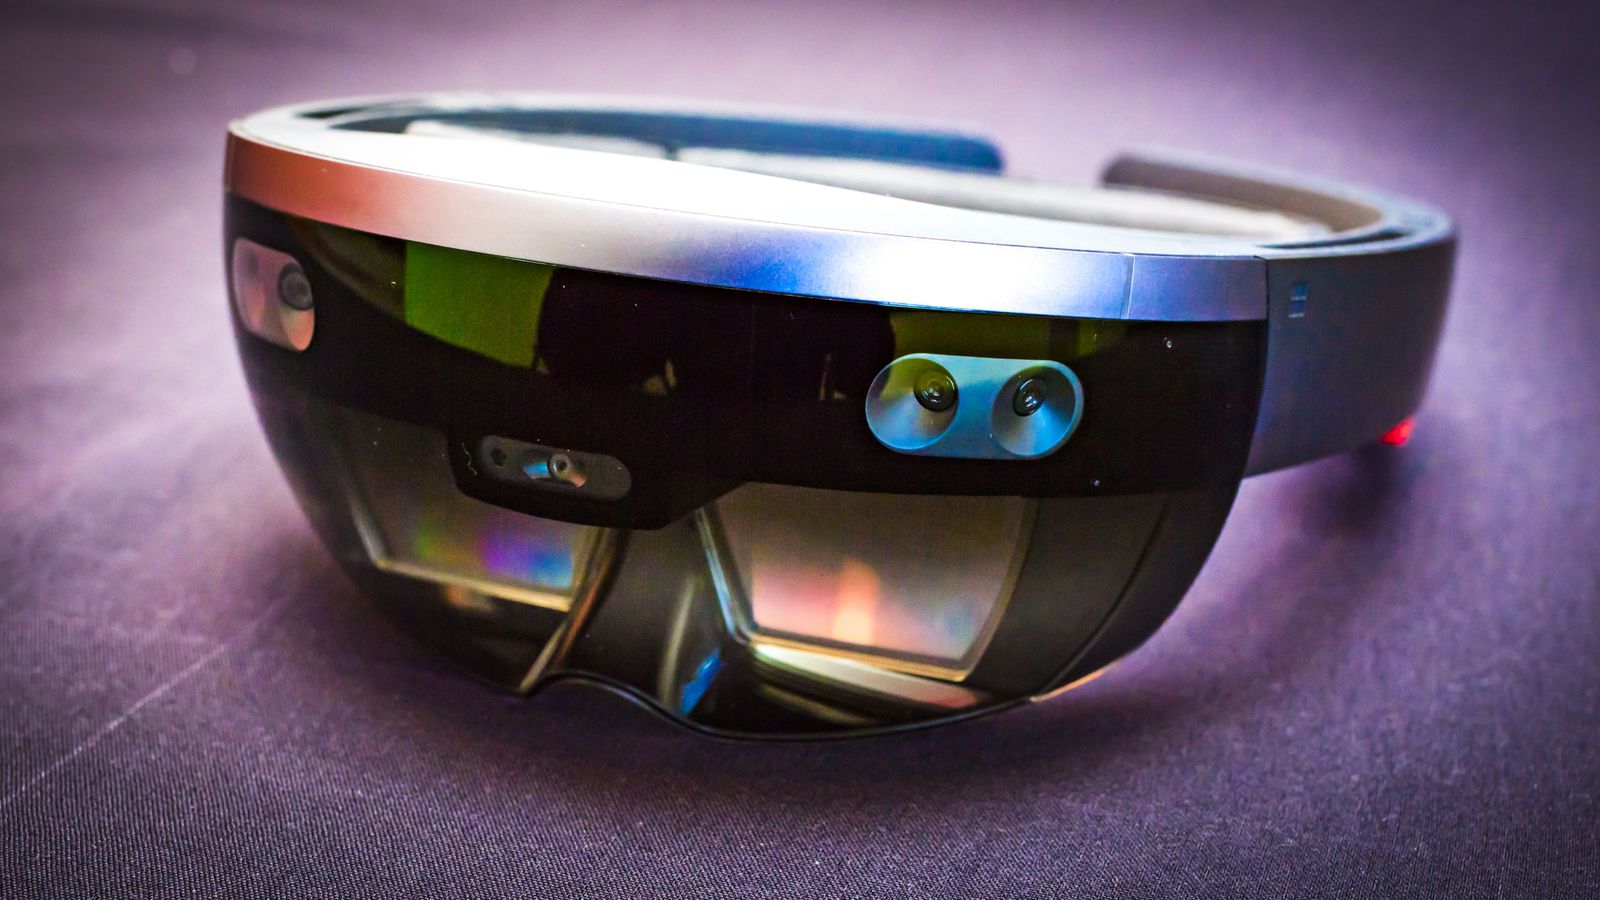 Microsoft may unveil the HoloLens 2 next month at MWC19